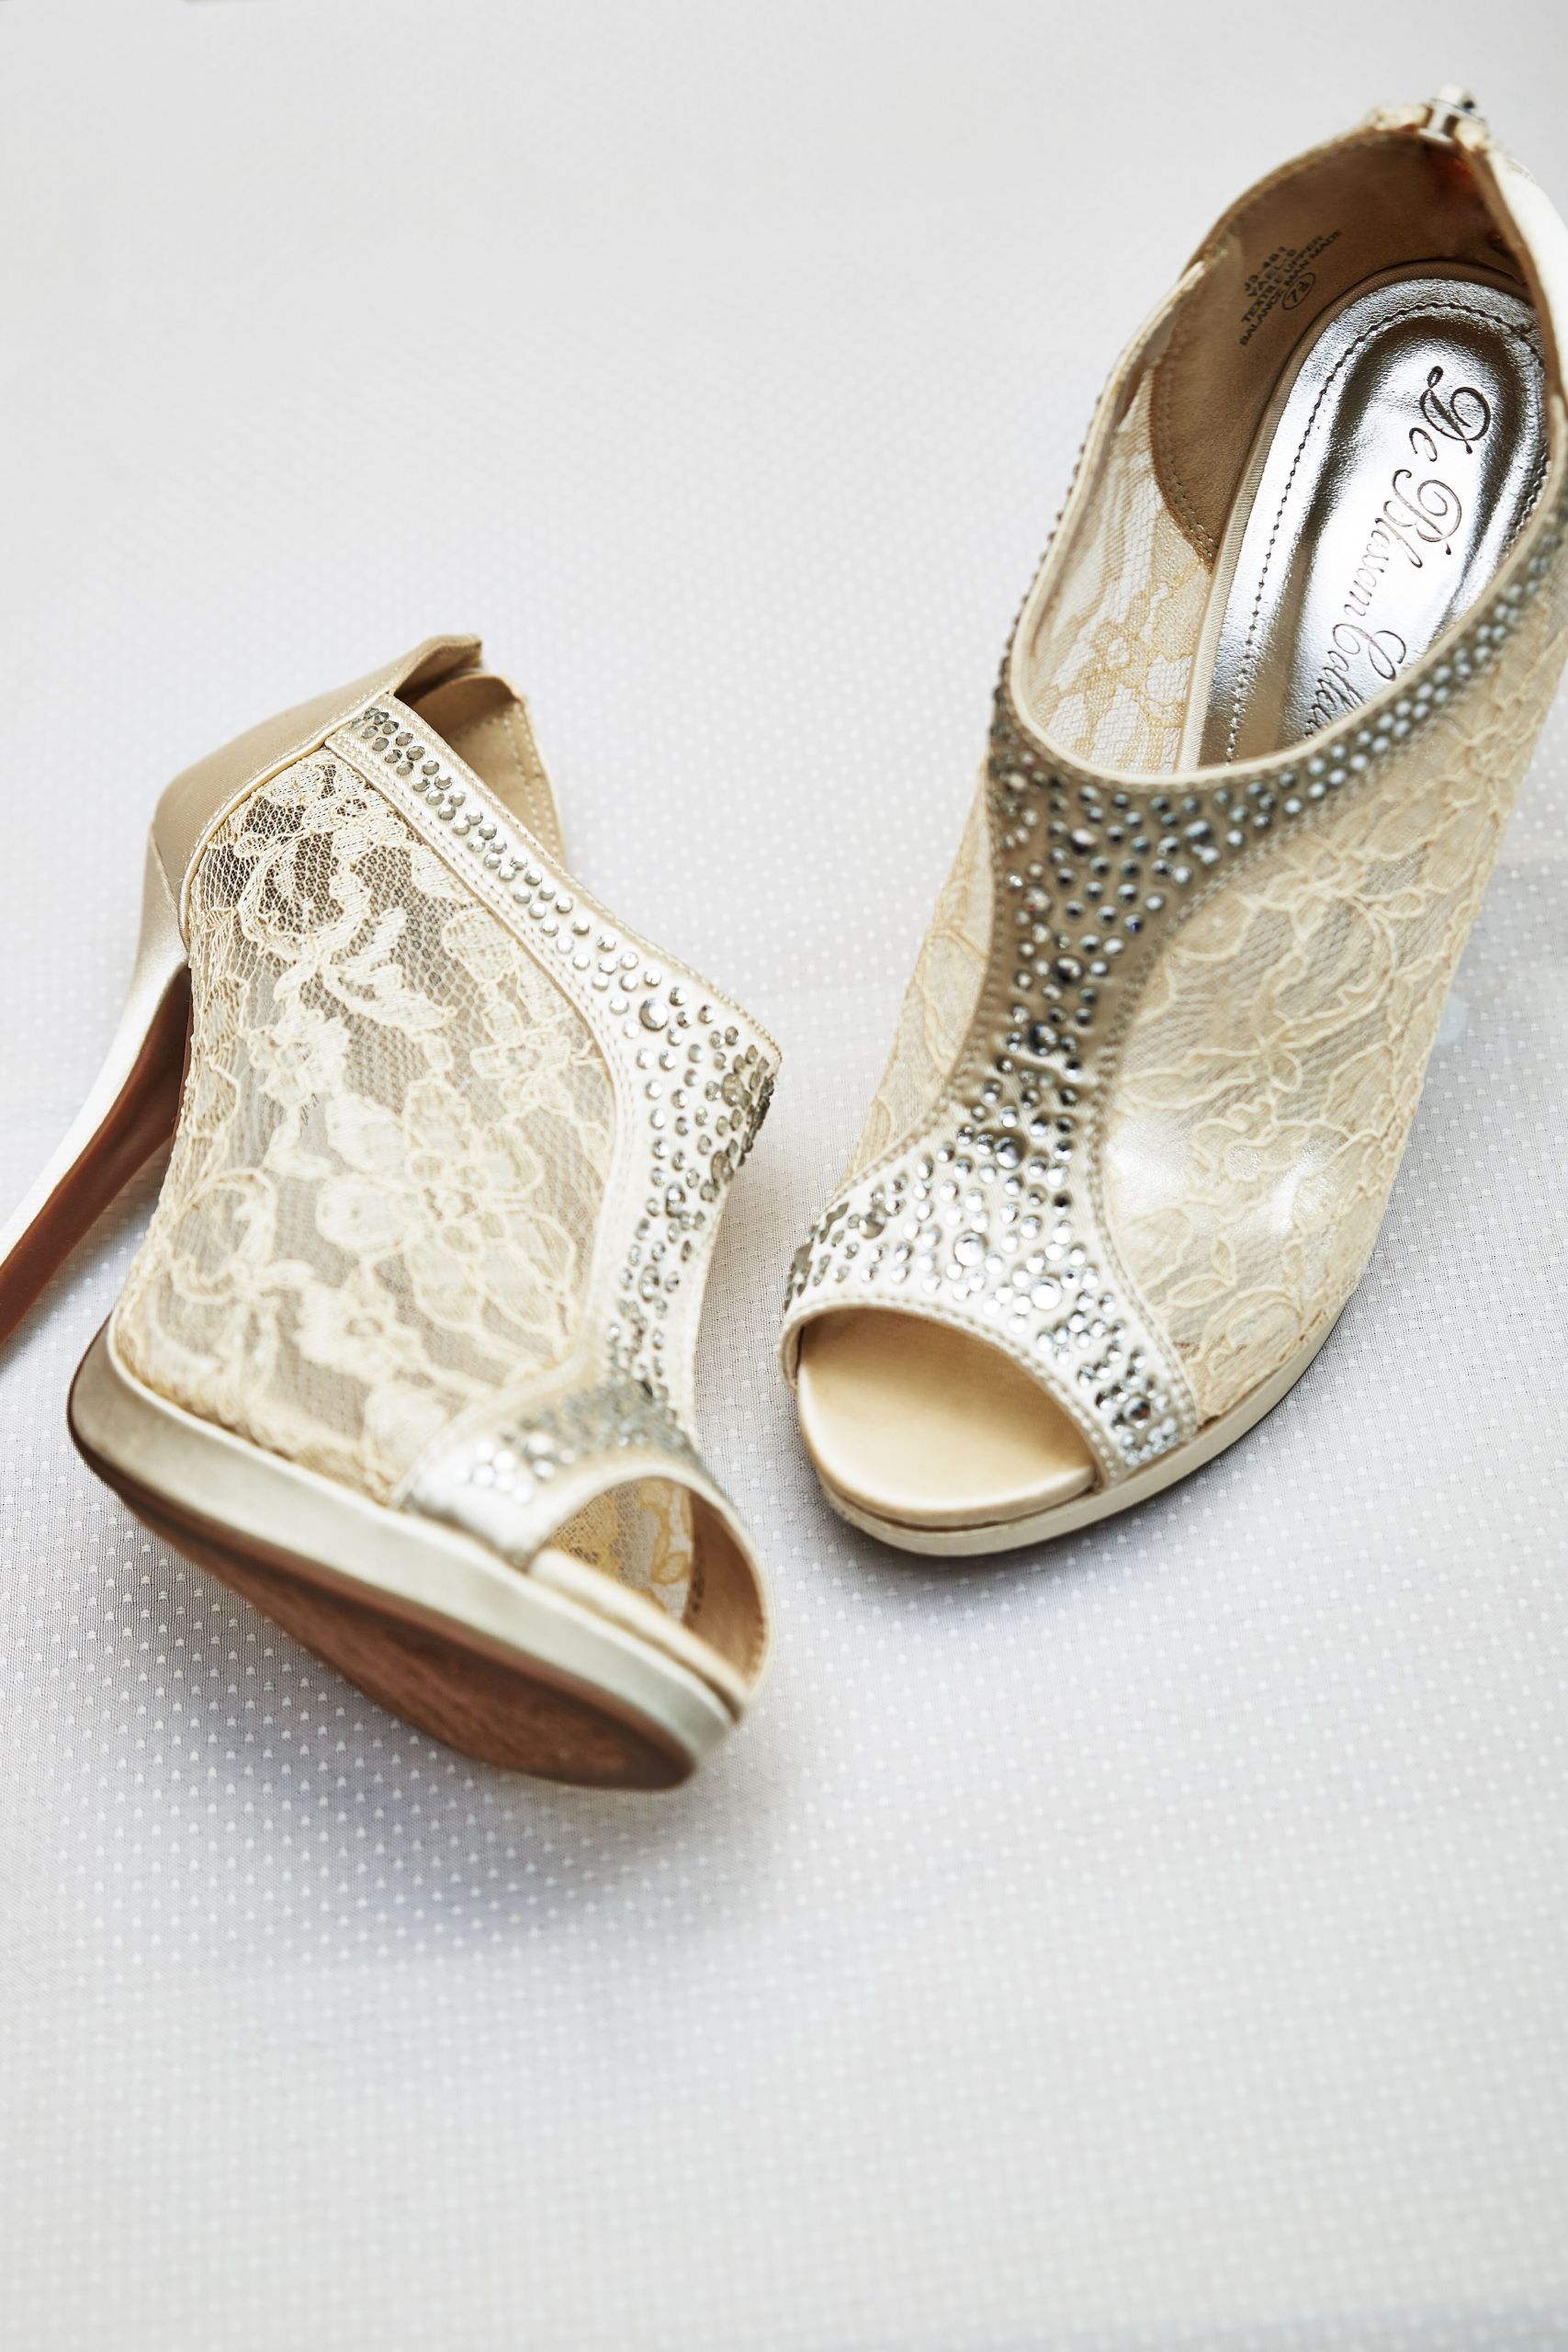 Champagne Colored Wedding Shoes
 Champagne Colored Shoes with Lace